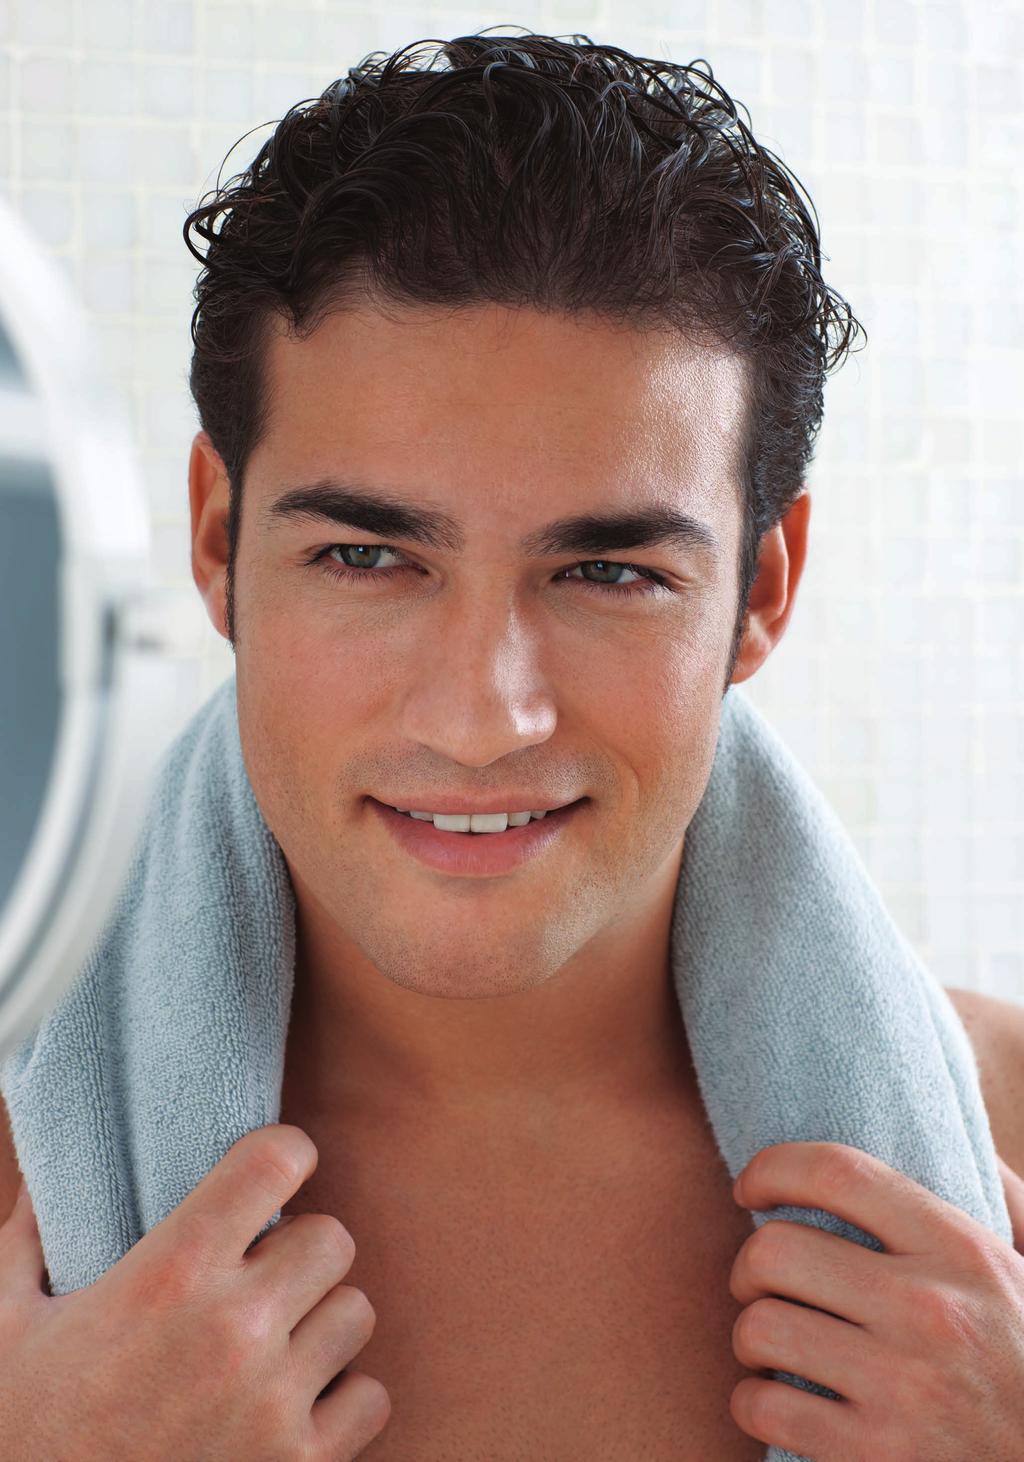 P1,150 The BASICS TONE Help him improve his skin texture, minimize the appearance of pores and leave his skin feeling